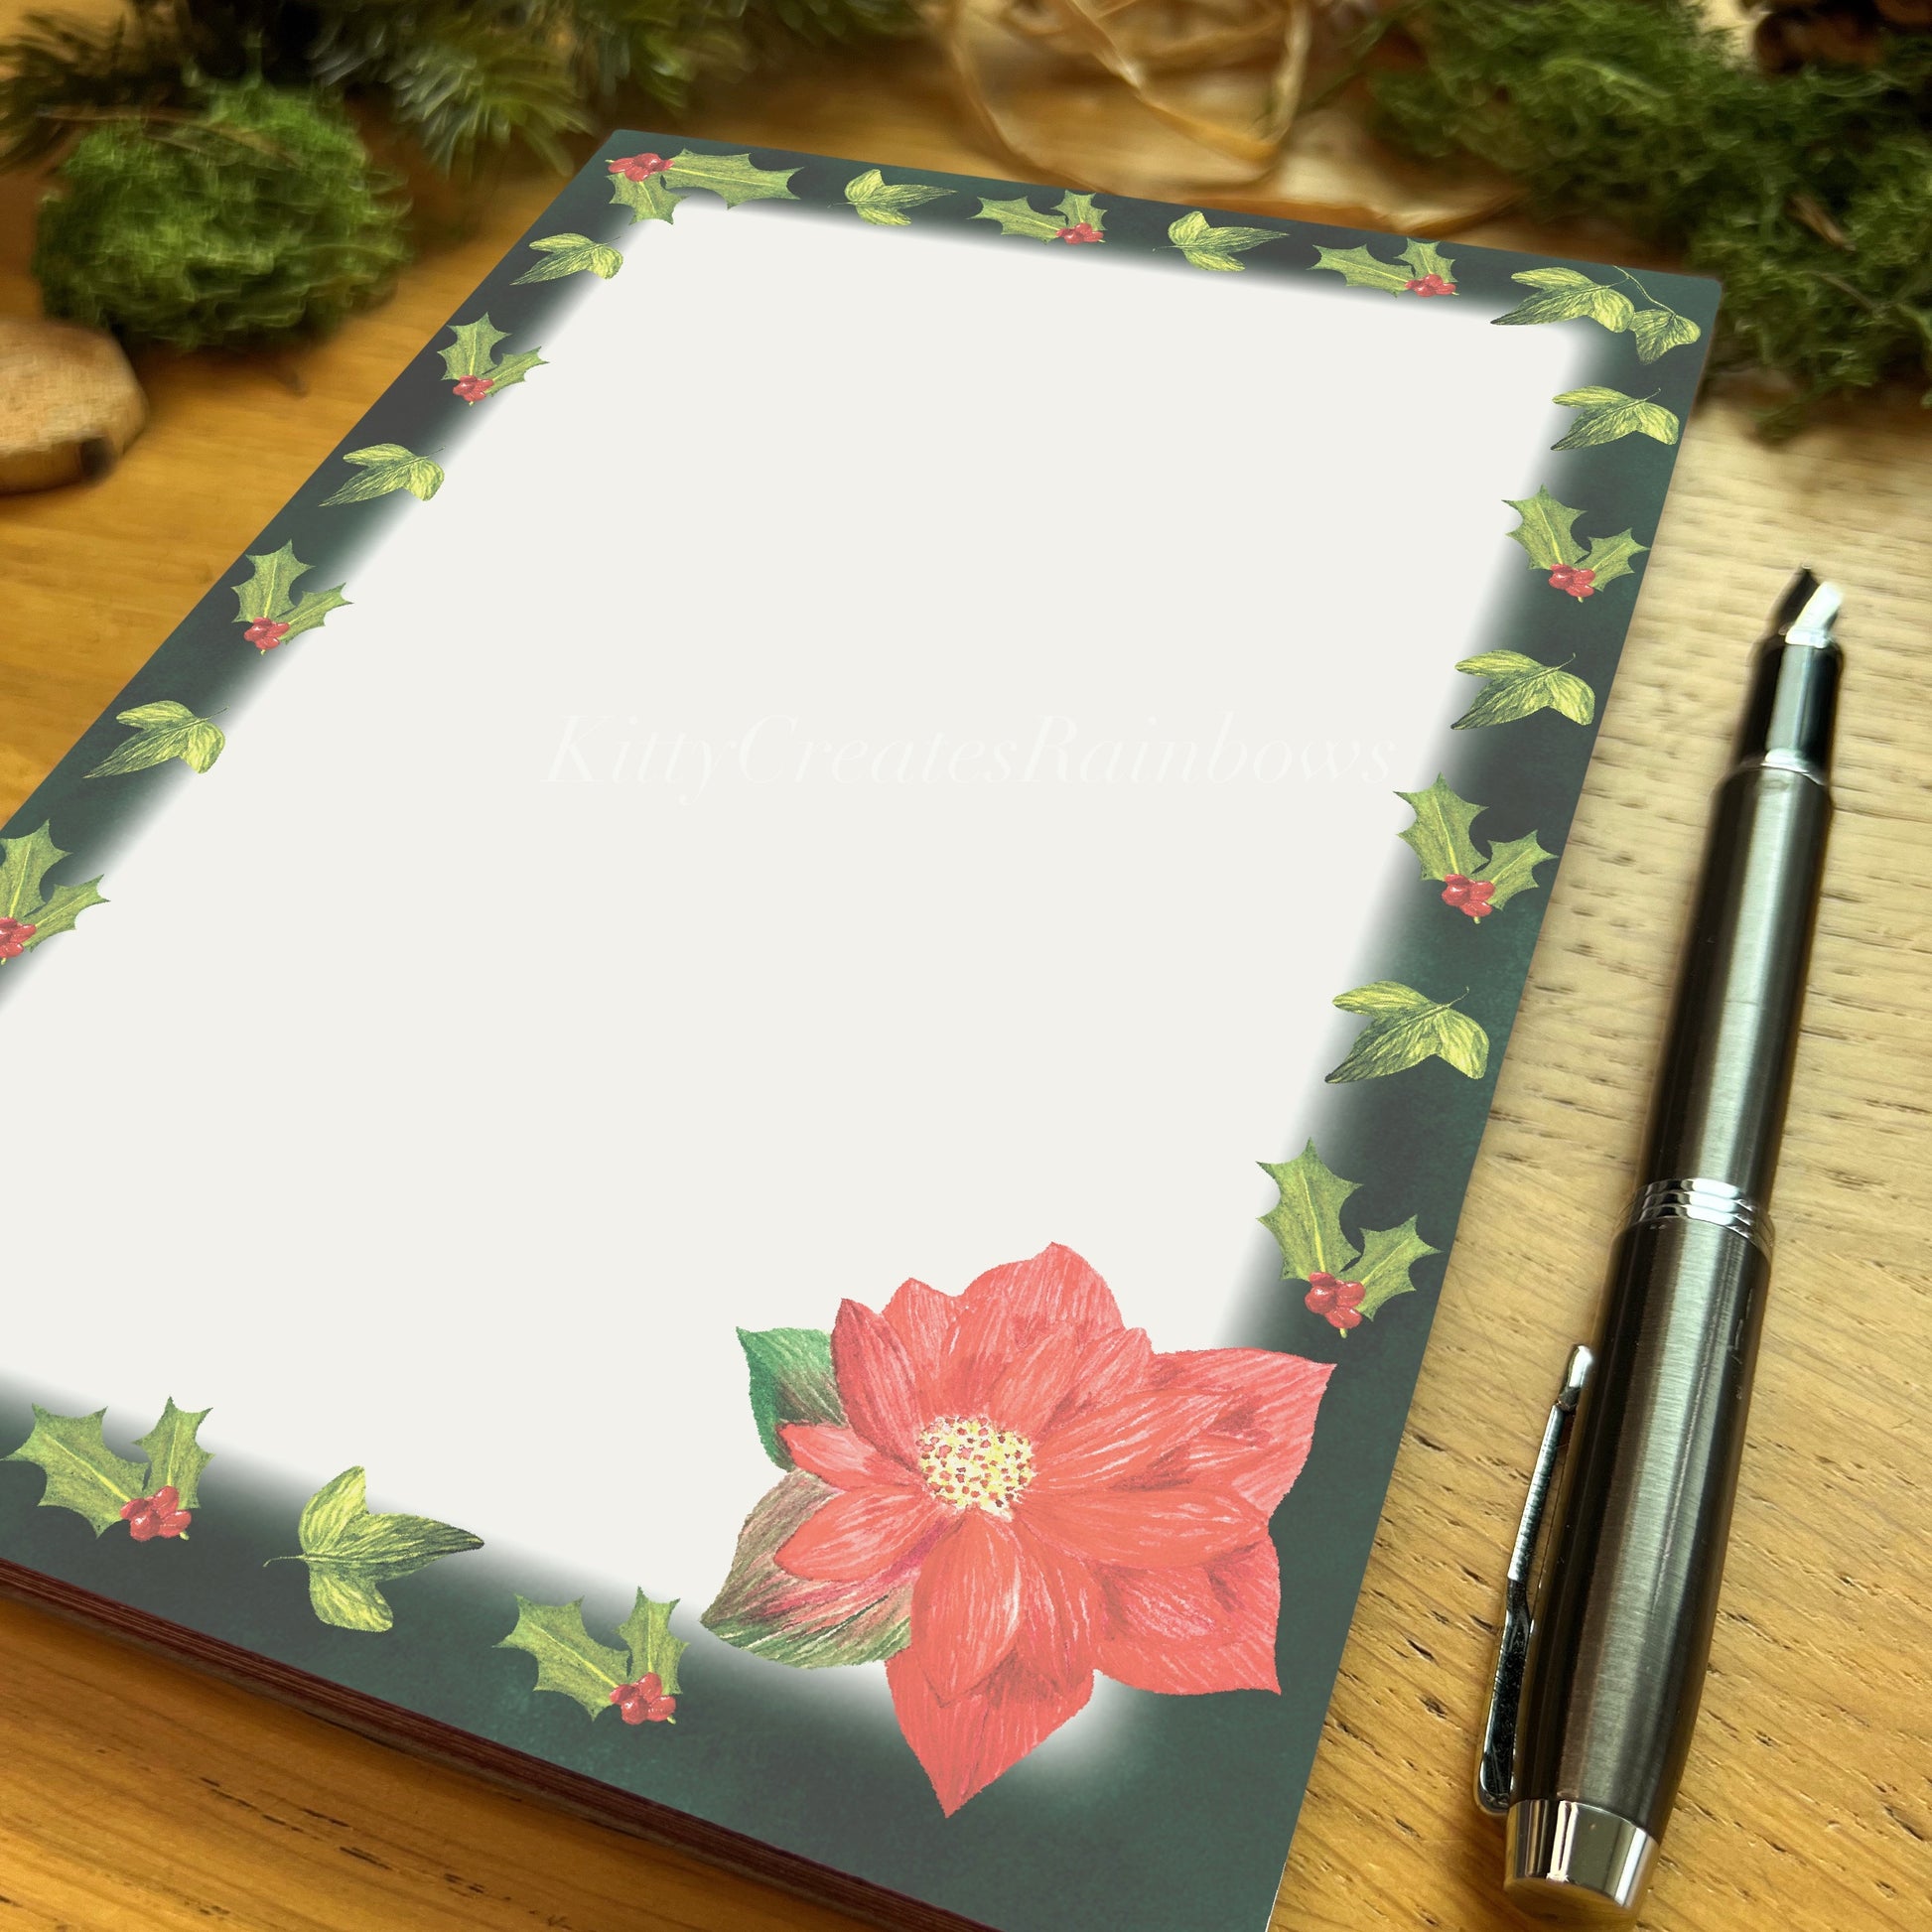 Winters bloom red poinsettia illustrated notepad with dark evergreen border, on a wooden table with fountain pen